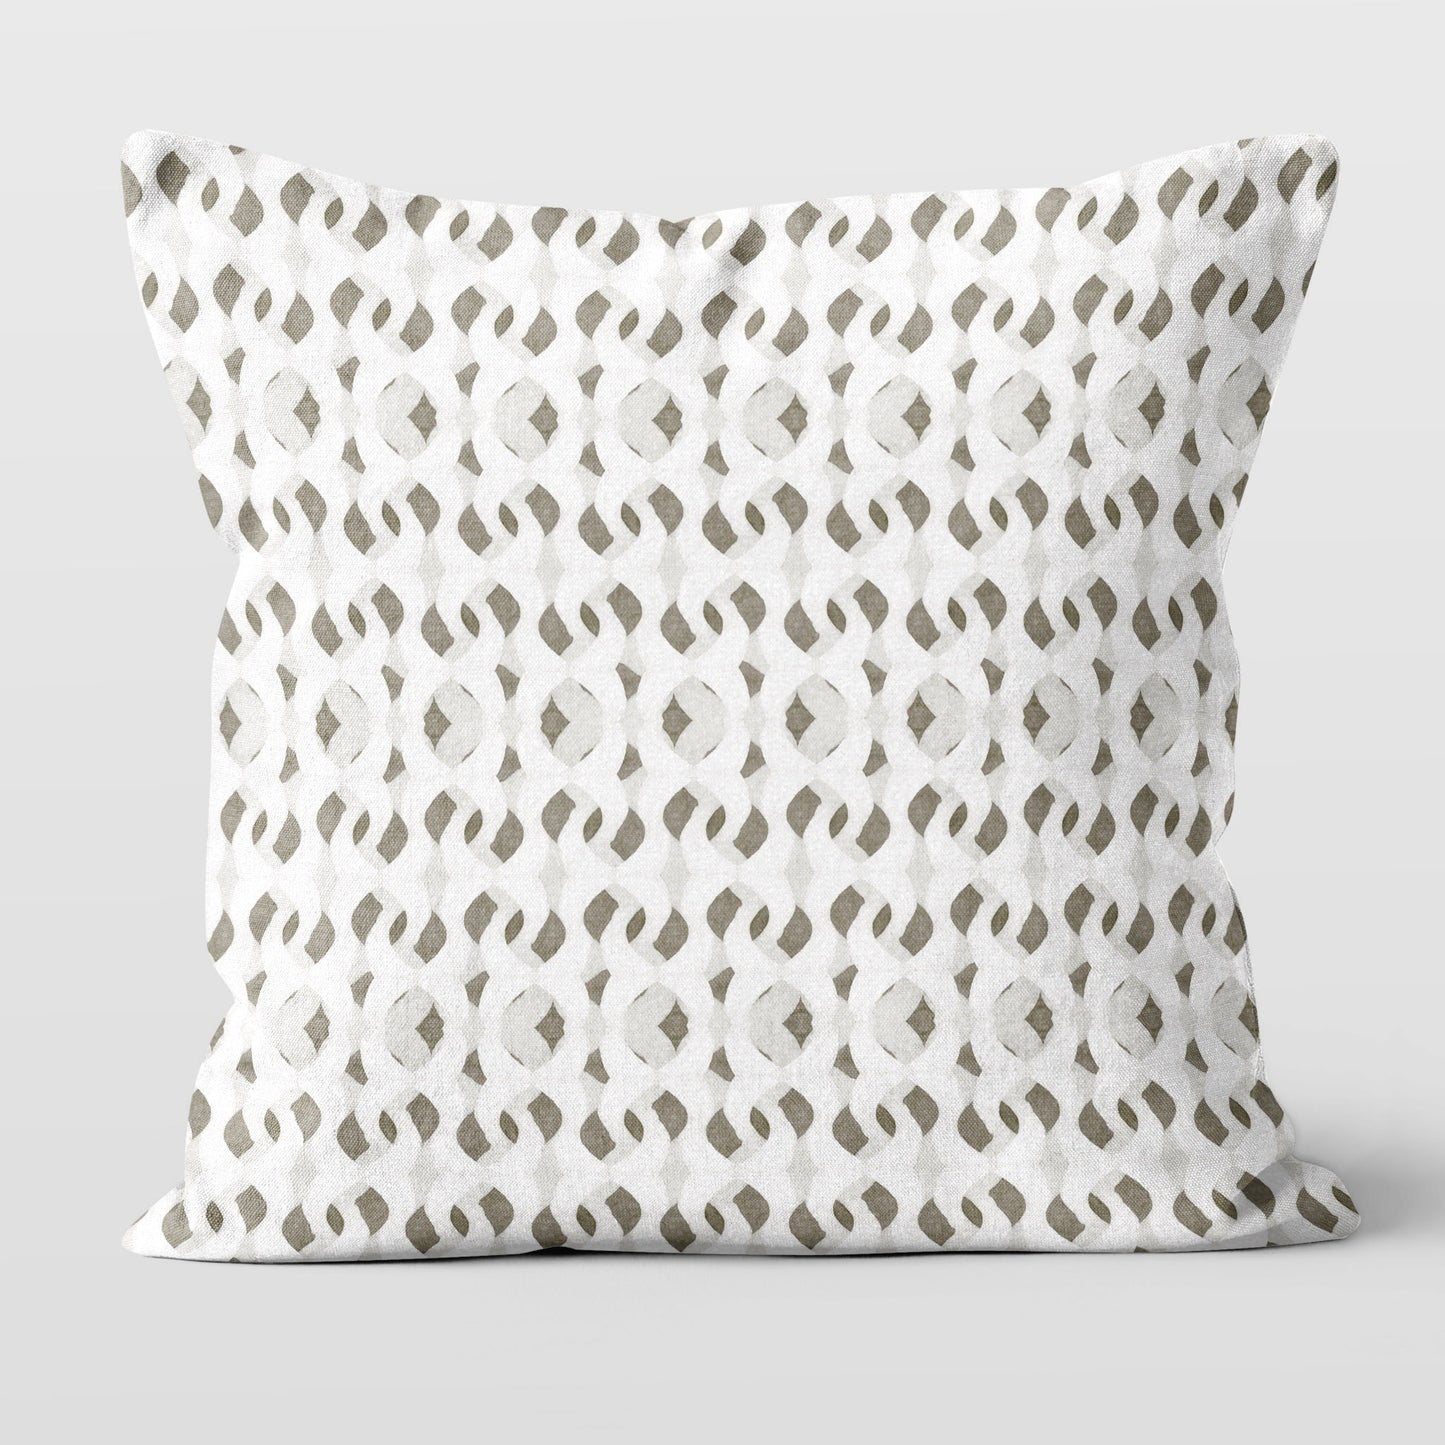 Square throw pillow featuring a painterly abstract pattern in off-white, tan, and gray.